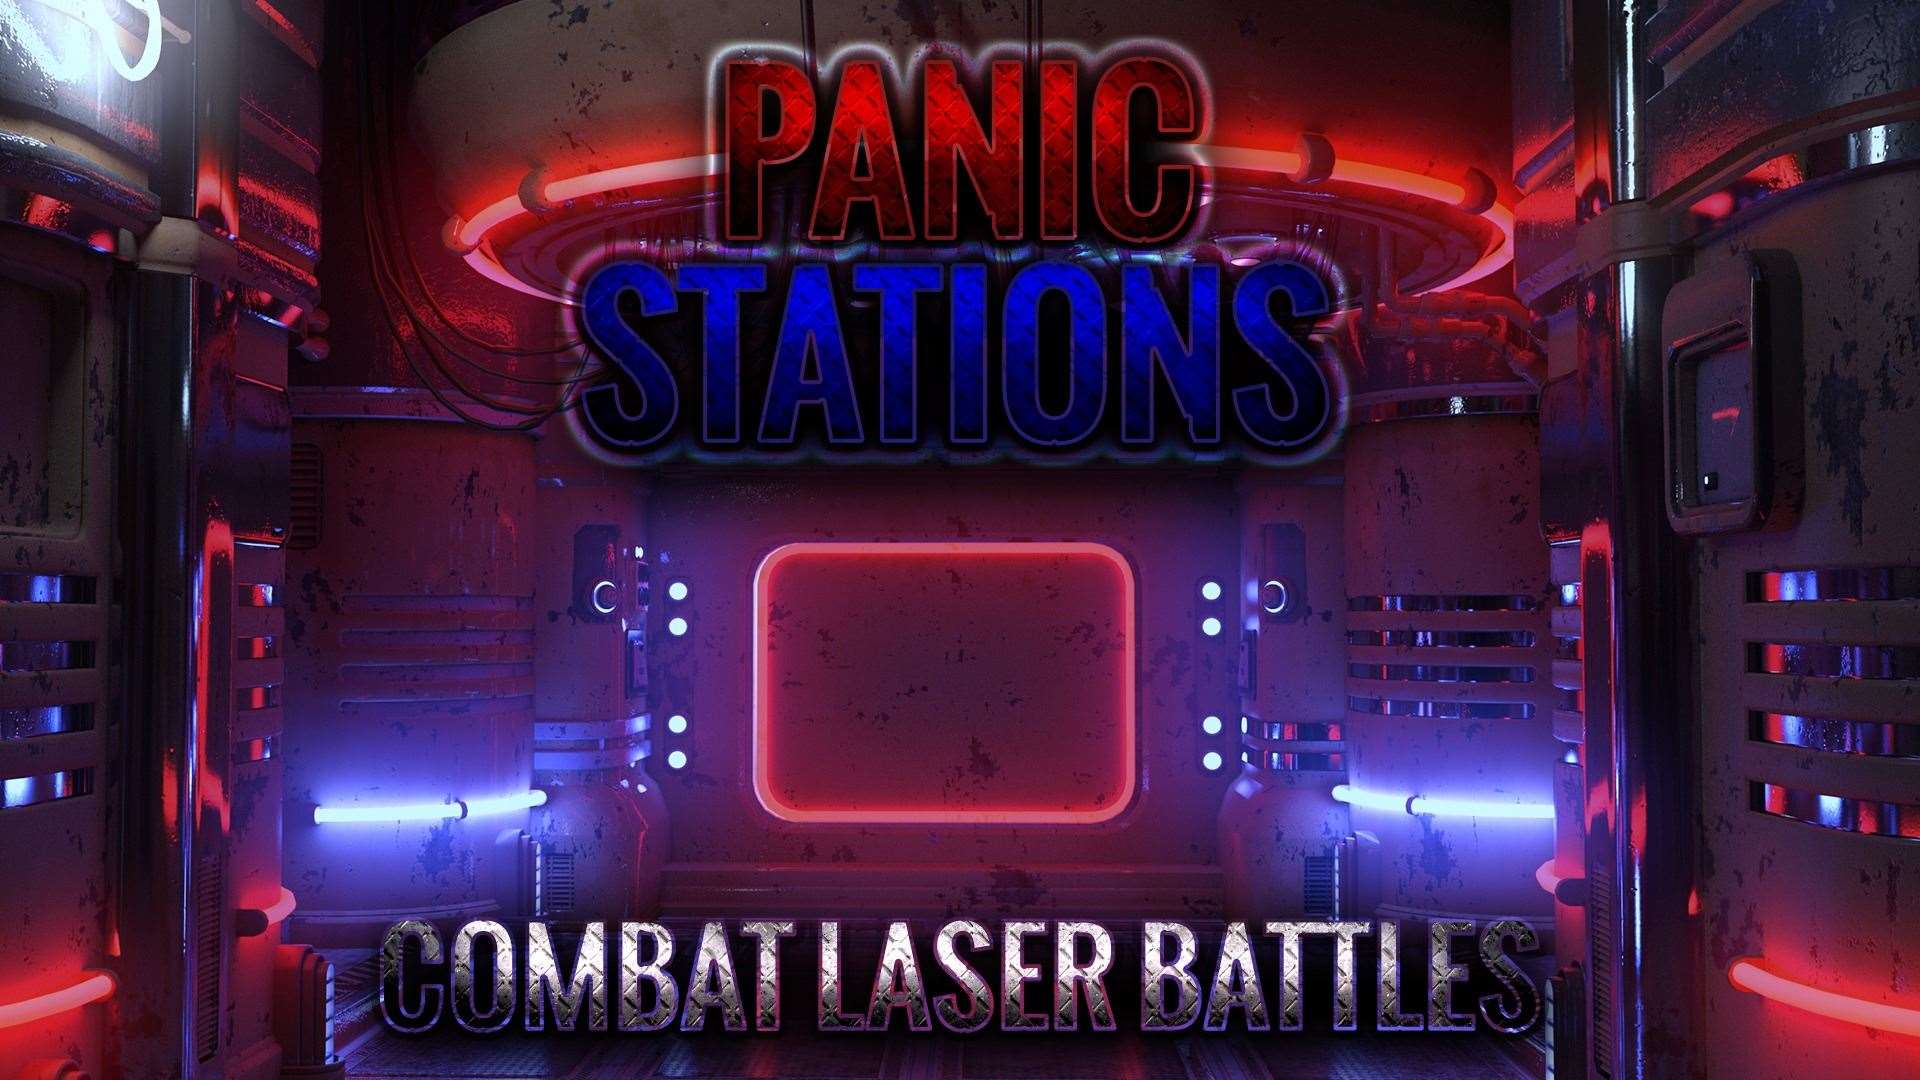 The laser battle will cover around 2,500sqft. Picture: The Panic Room